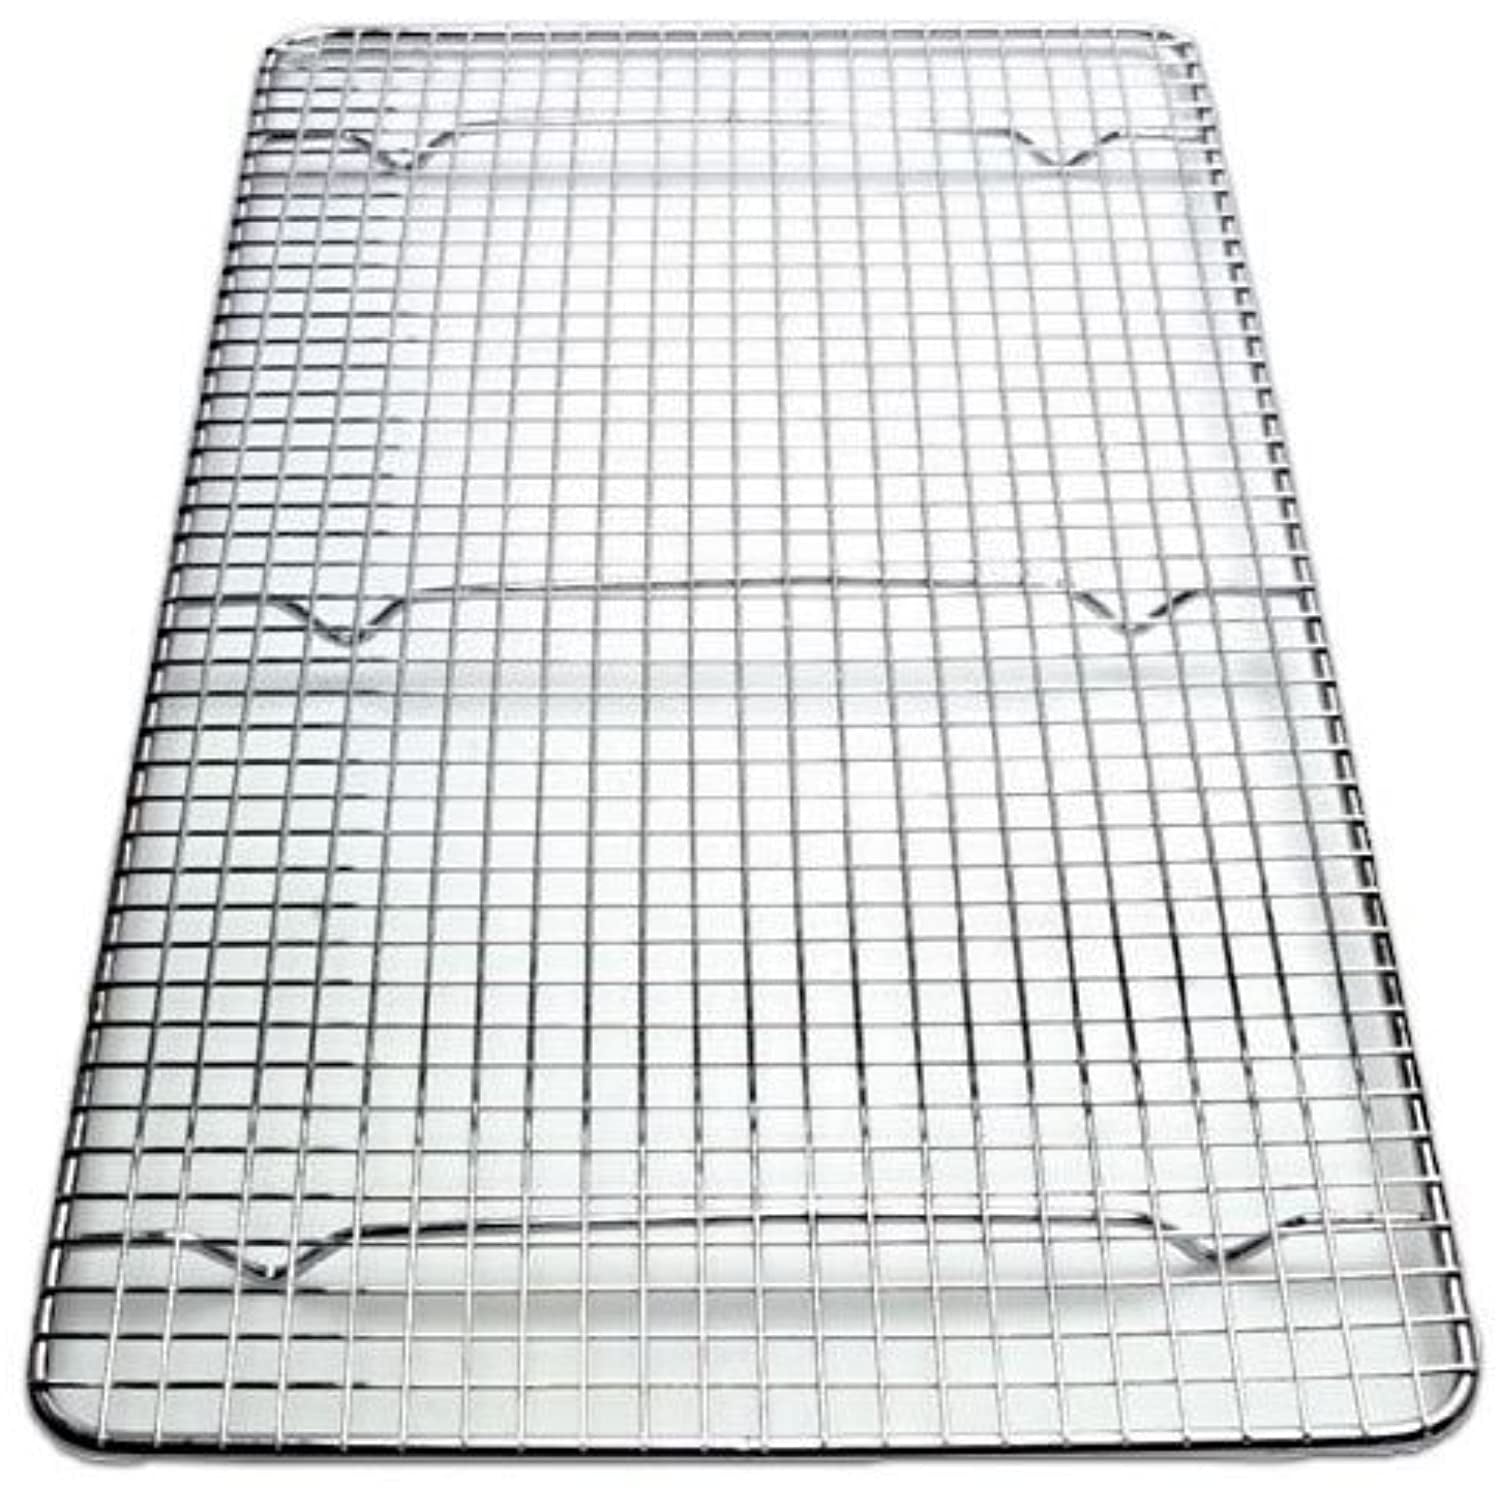 Choice 8 1/2 x 12 Chrome Plated Footed Wire Cooling Rack for Quarter Size  Sheet Pan